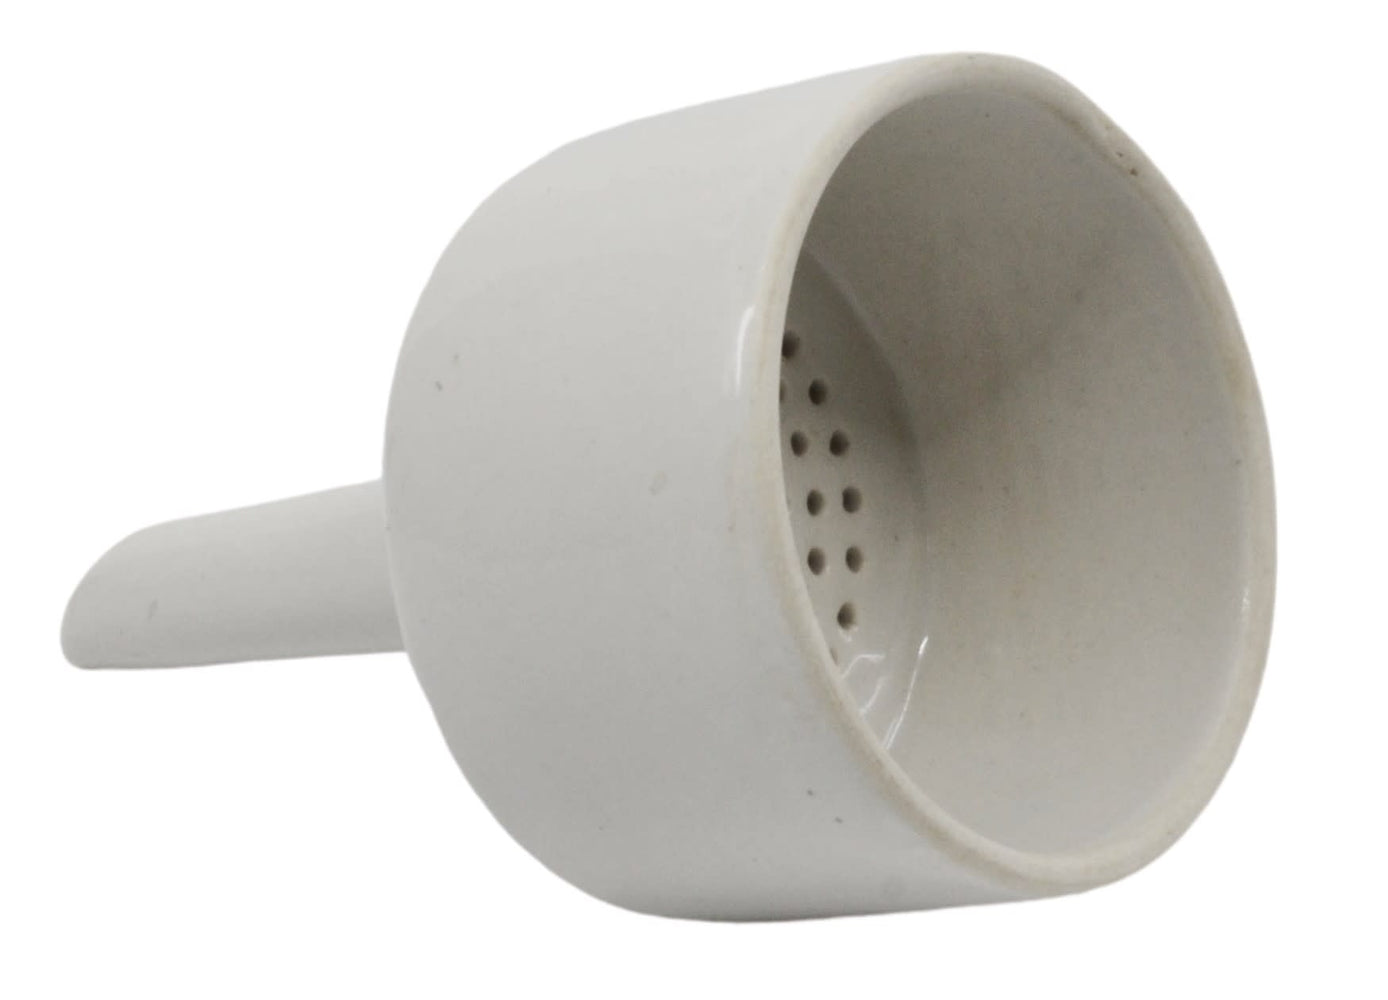 Buchner Funnel, 6cm - Porcelain - Straight Sides, Perforated Plate